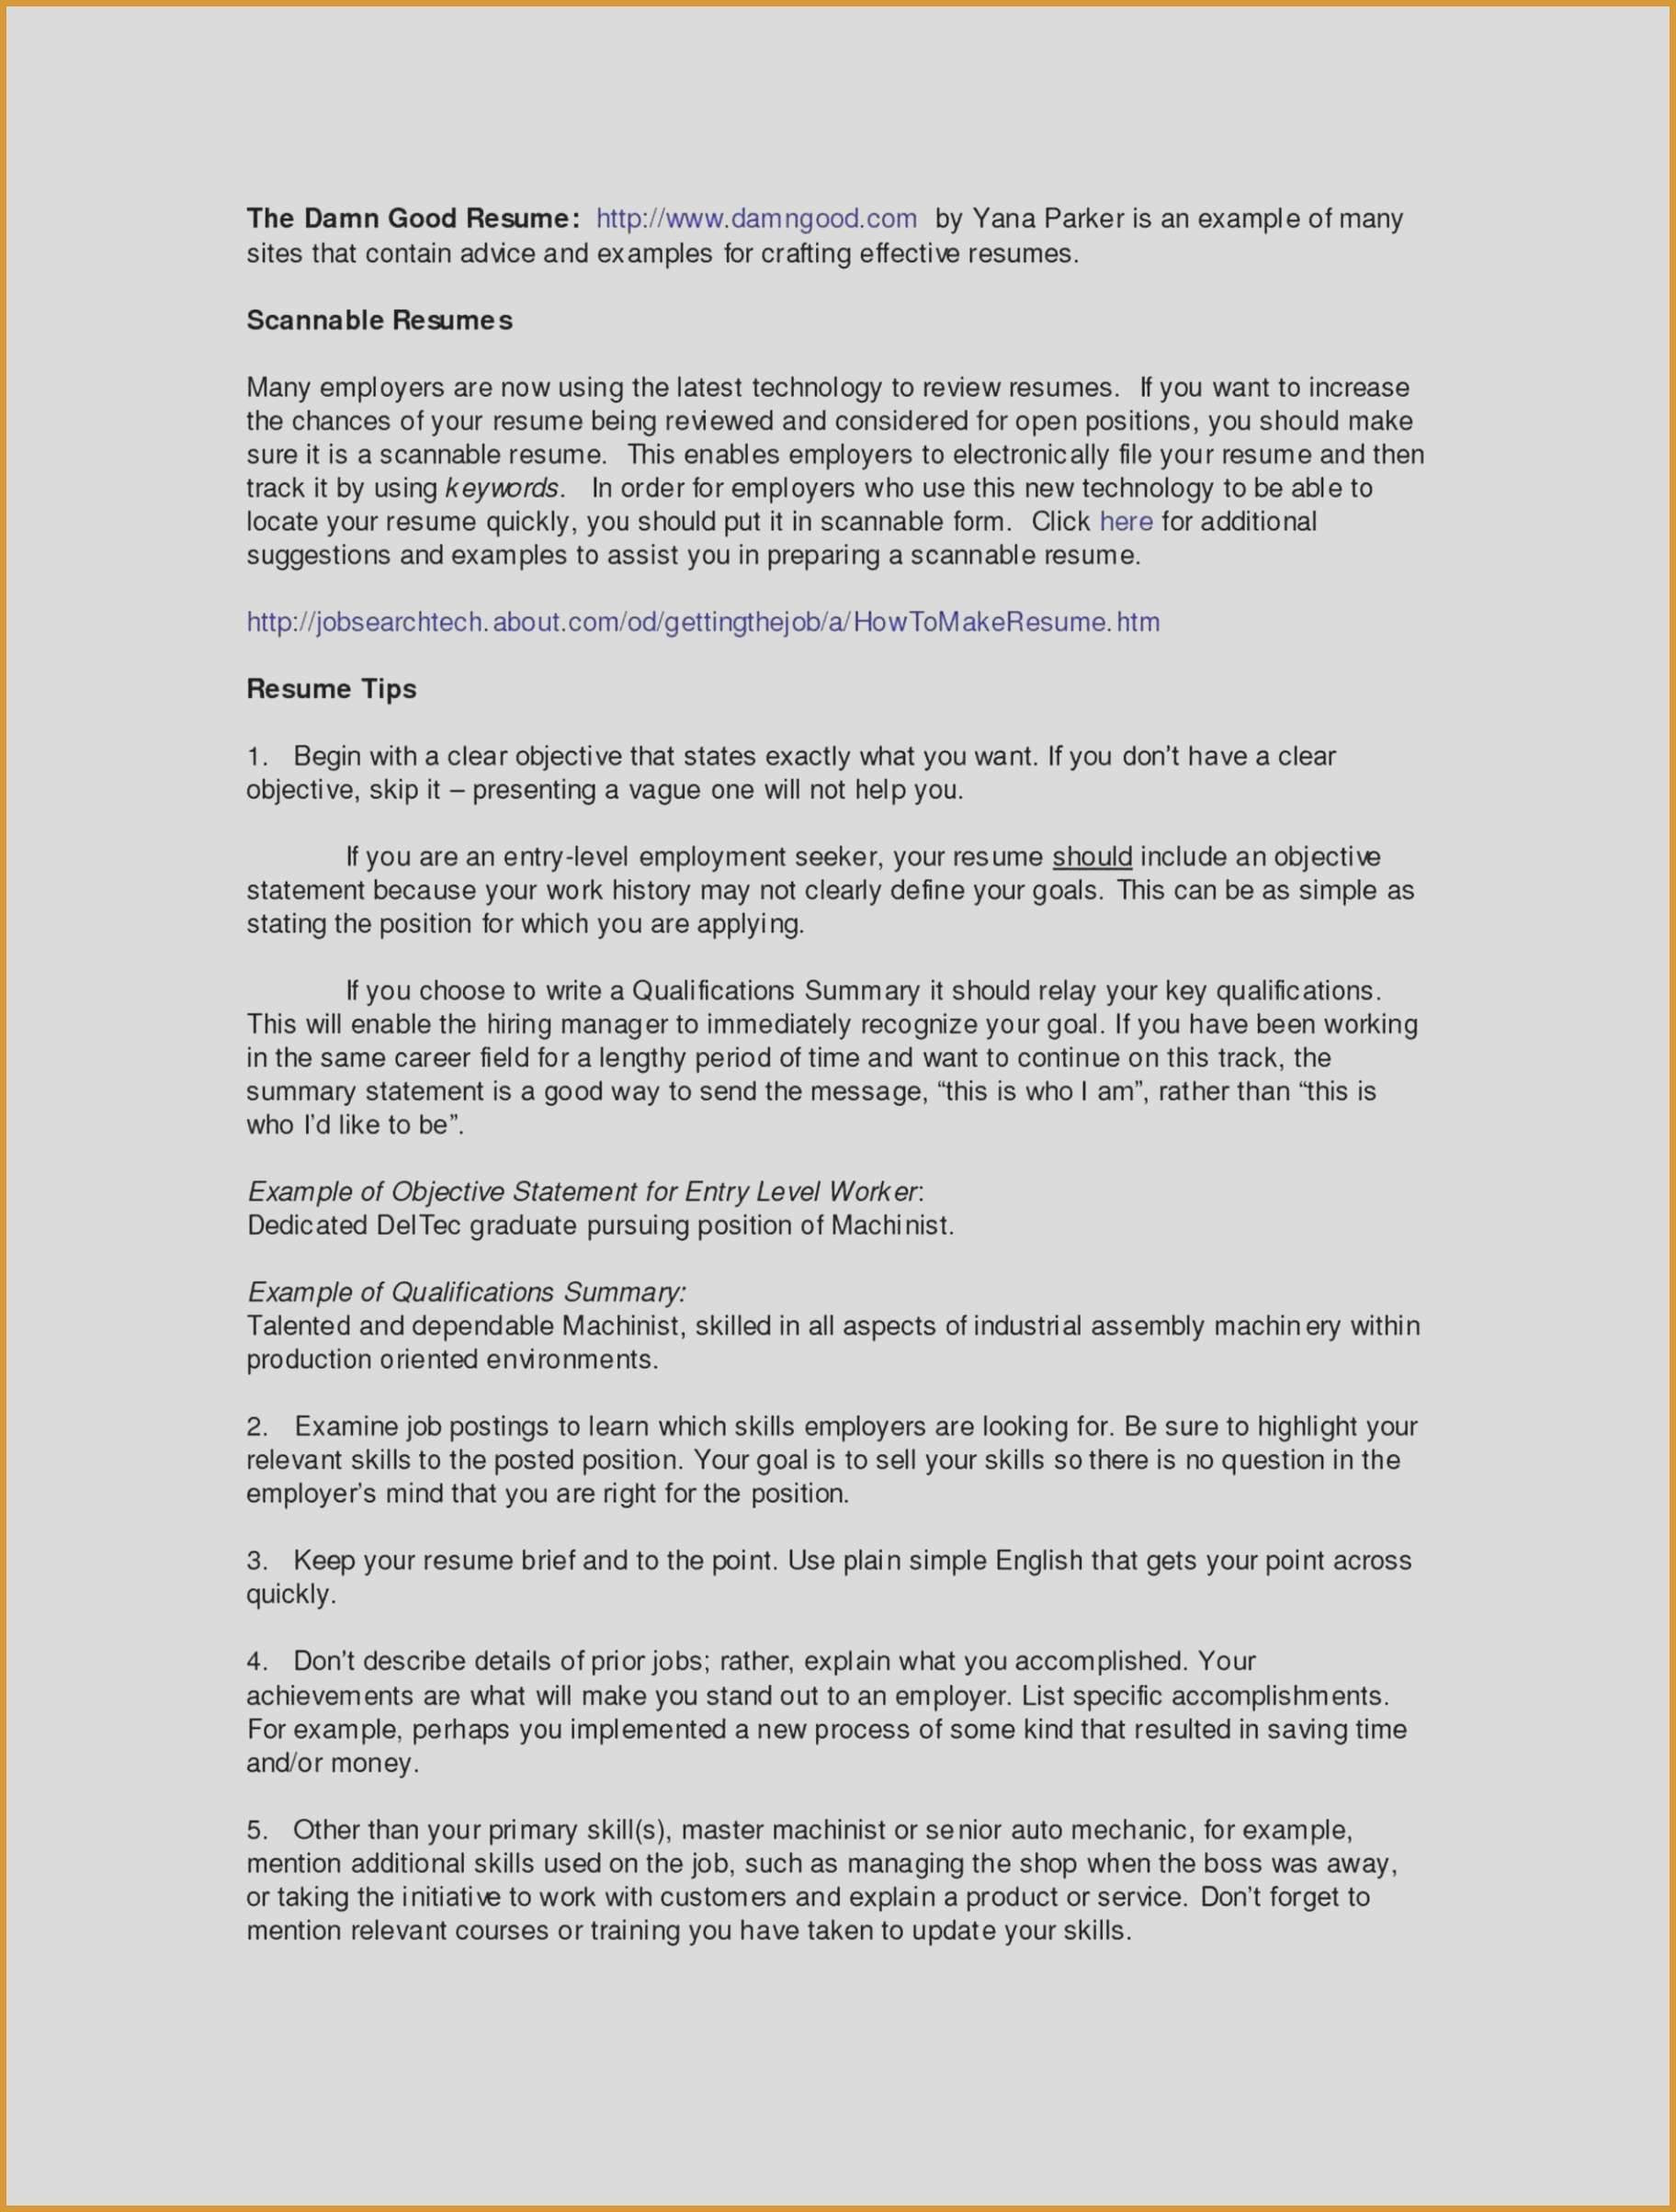 Resume Summary Example Job Resume Summary Examples Professional Entry Level Job Resume Template Simple Administrative Assistant Of Job Resume Summary Examples resume summary example|wikiresume.com